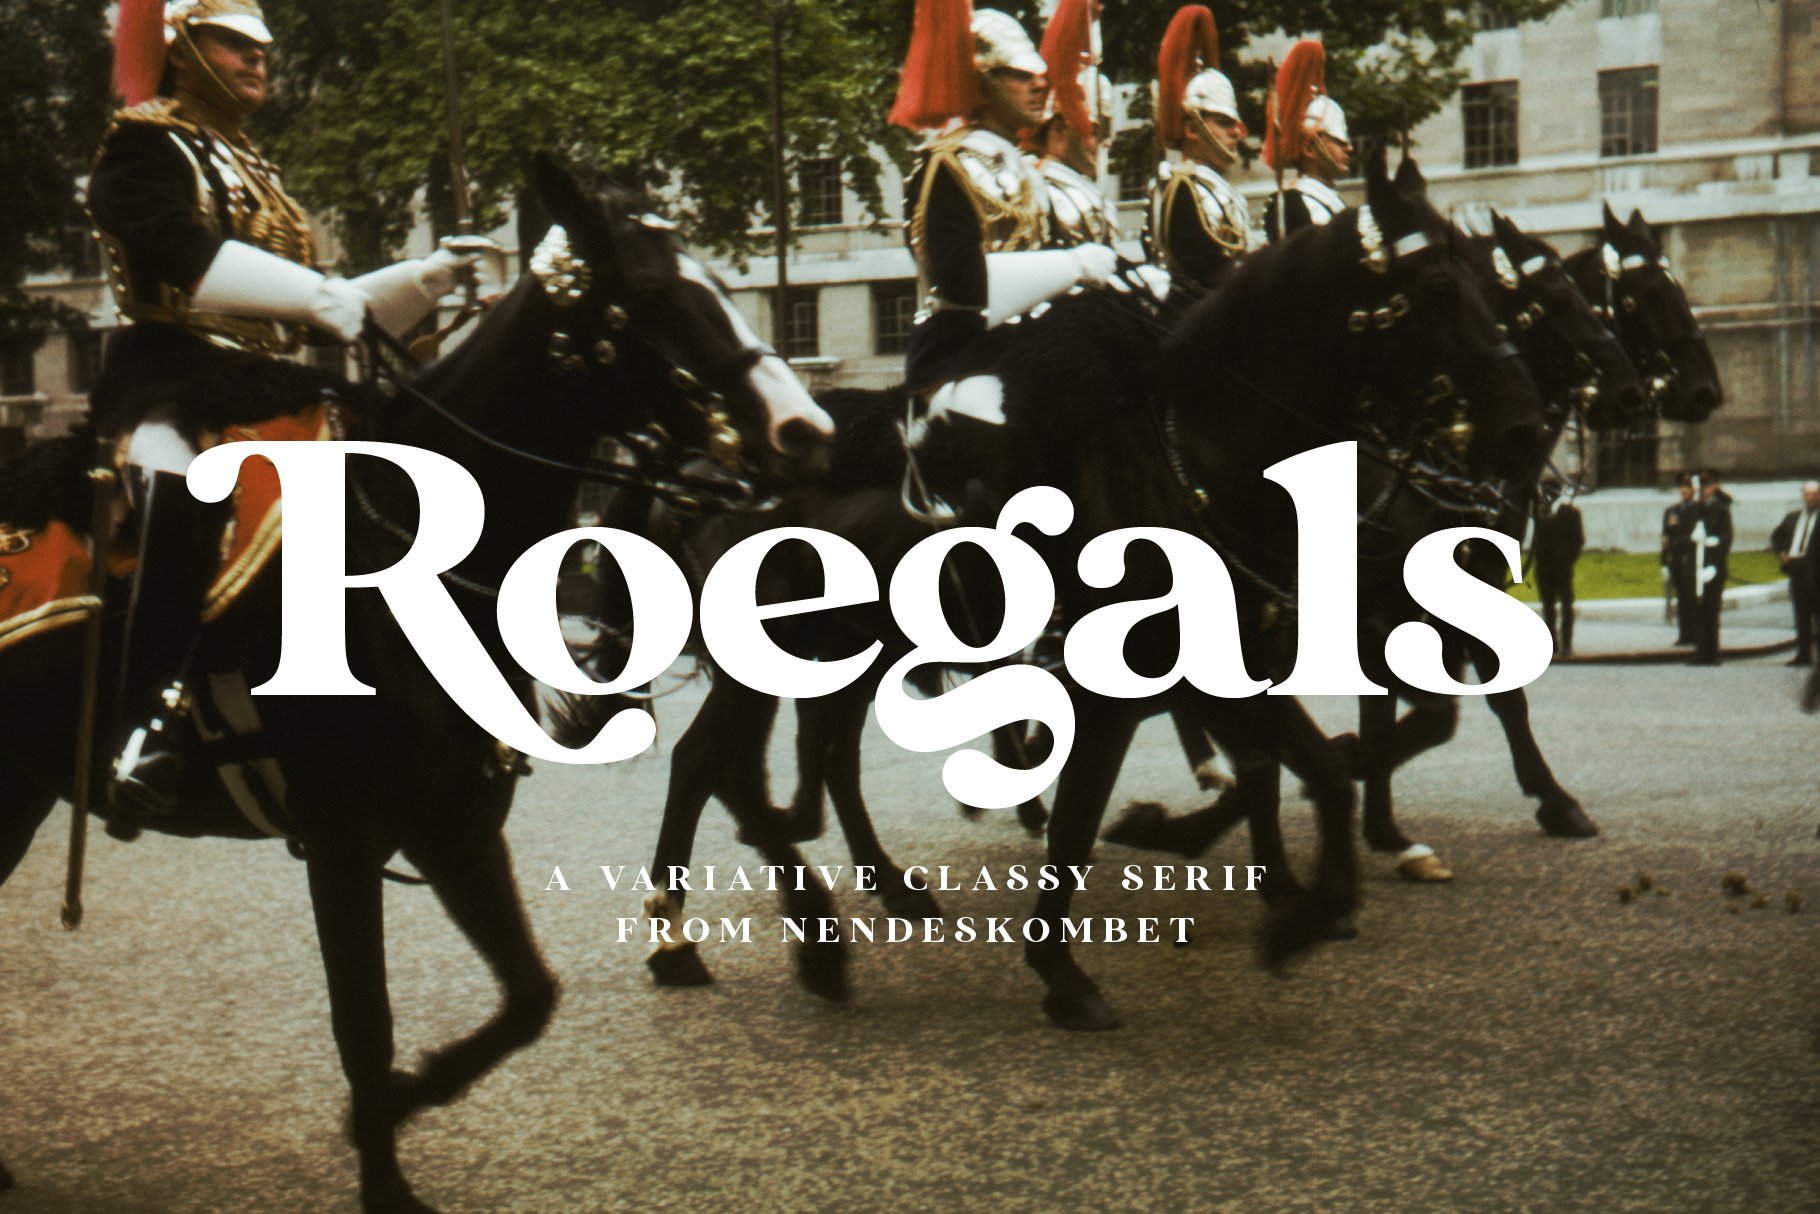 Roegals - A Variative Classy Serif cover image.